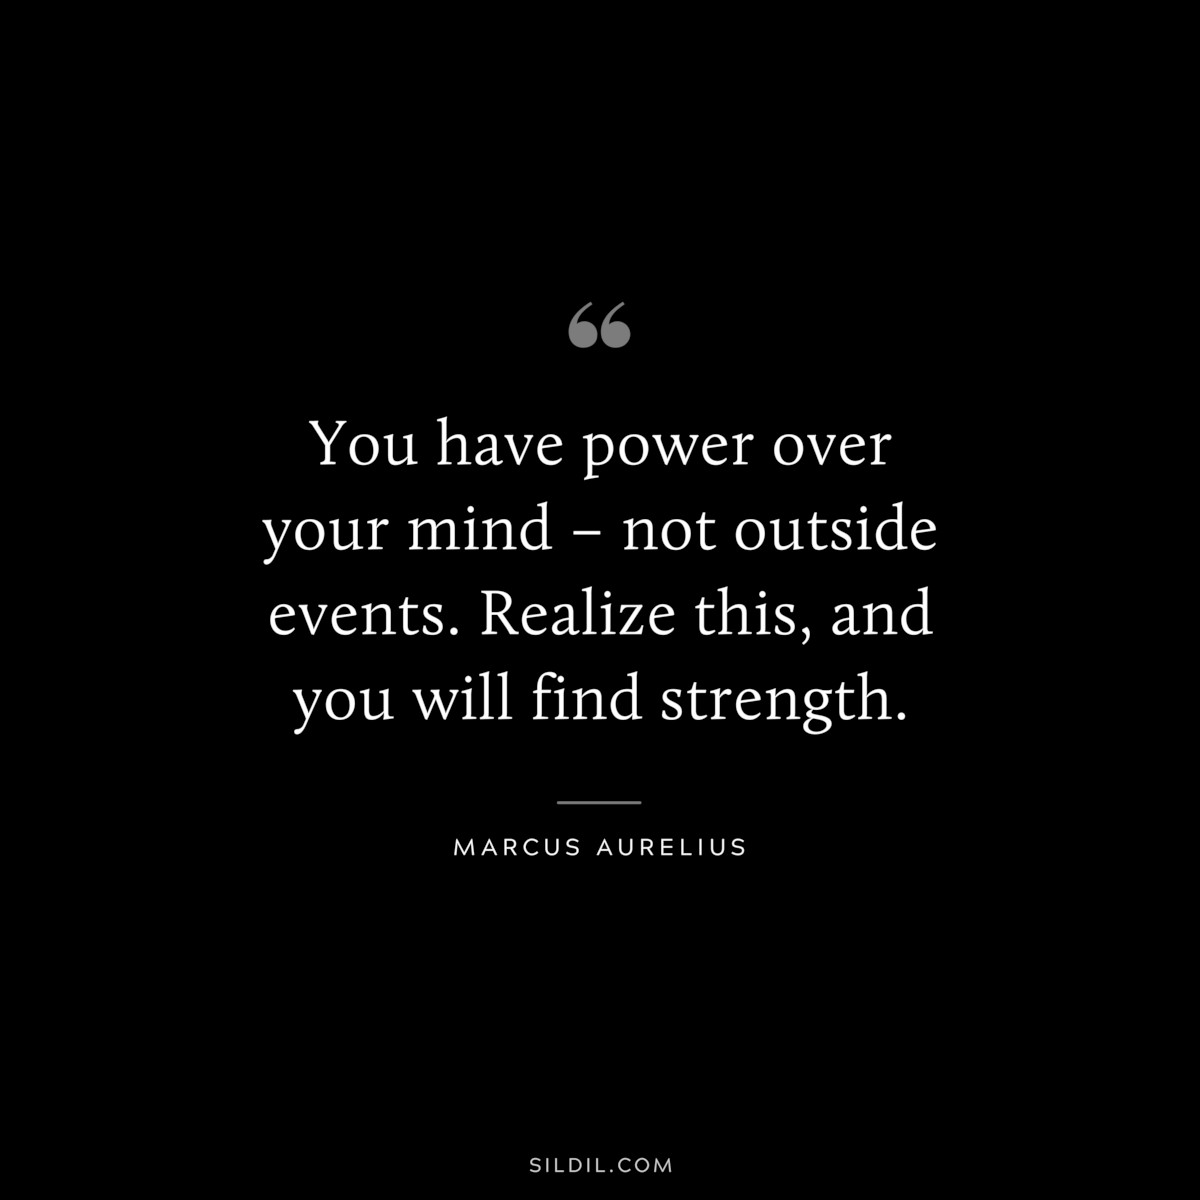 You have power over your mind – not outside events. Realize this, and you will find strength. ― Marcus Aurelius